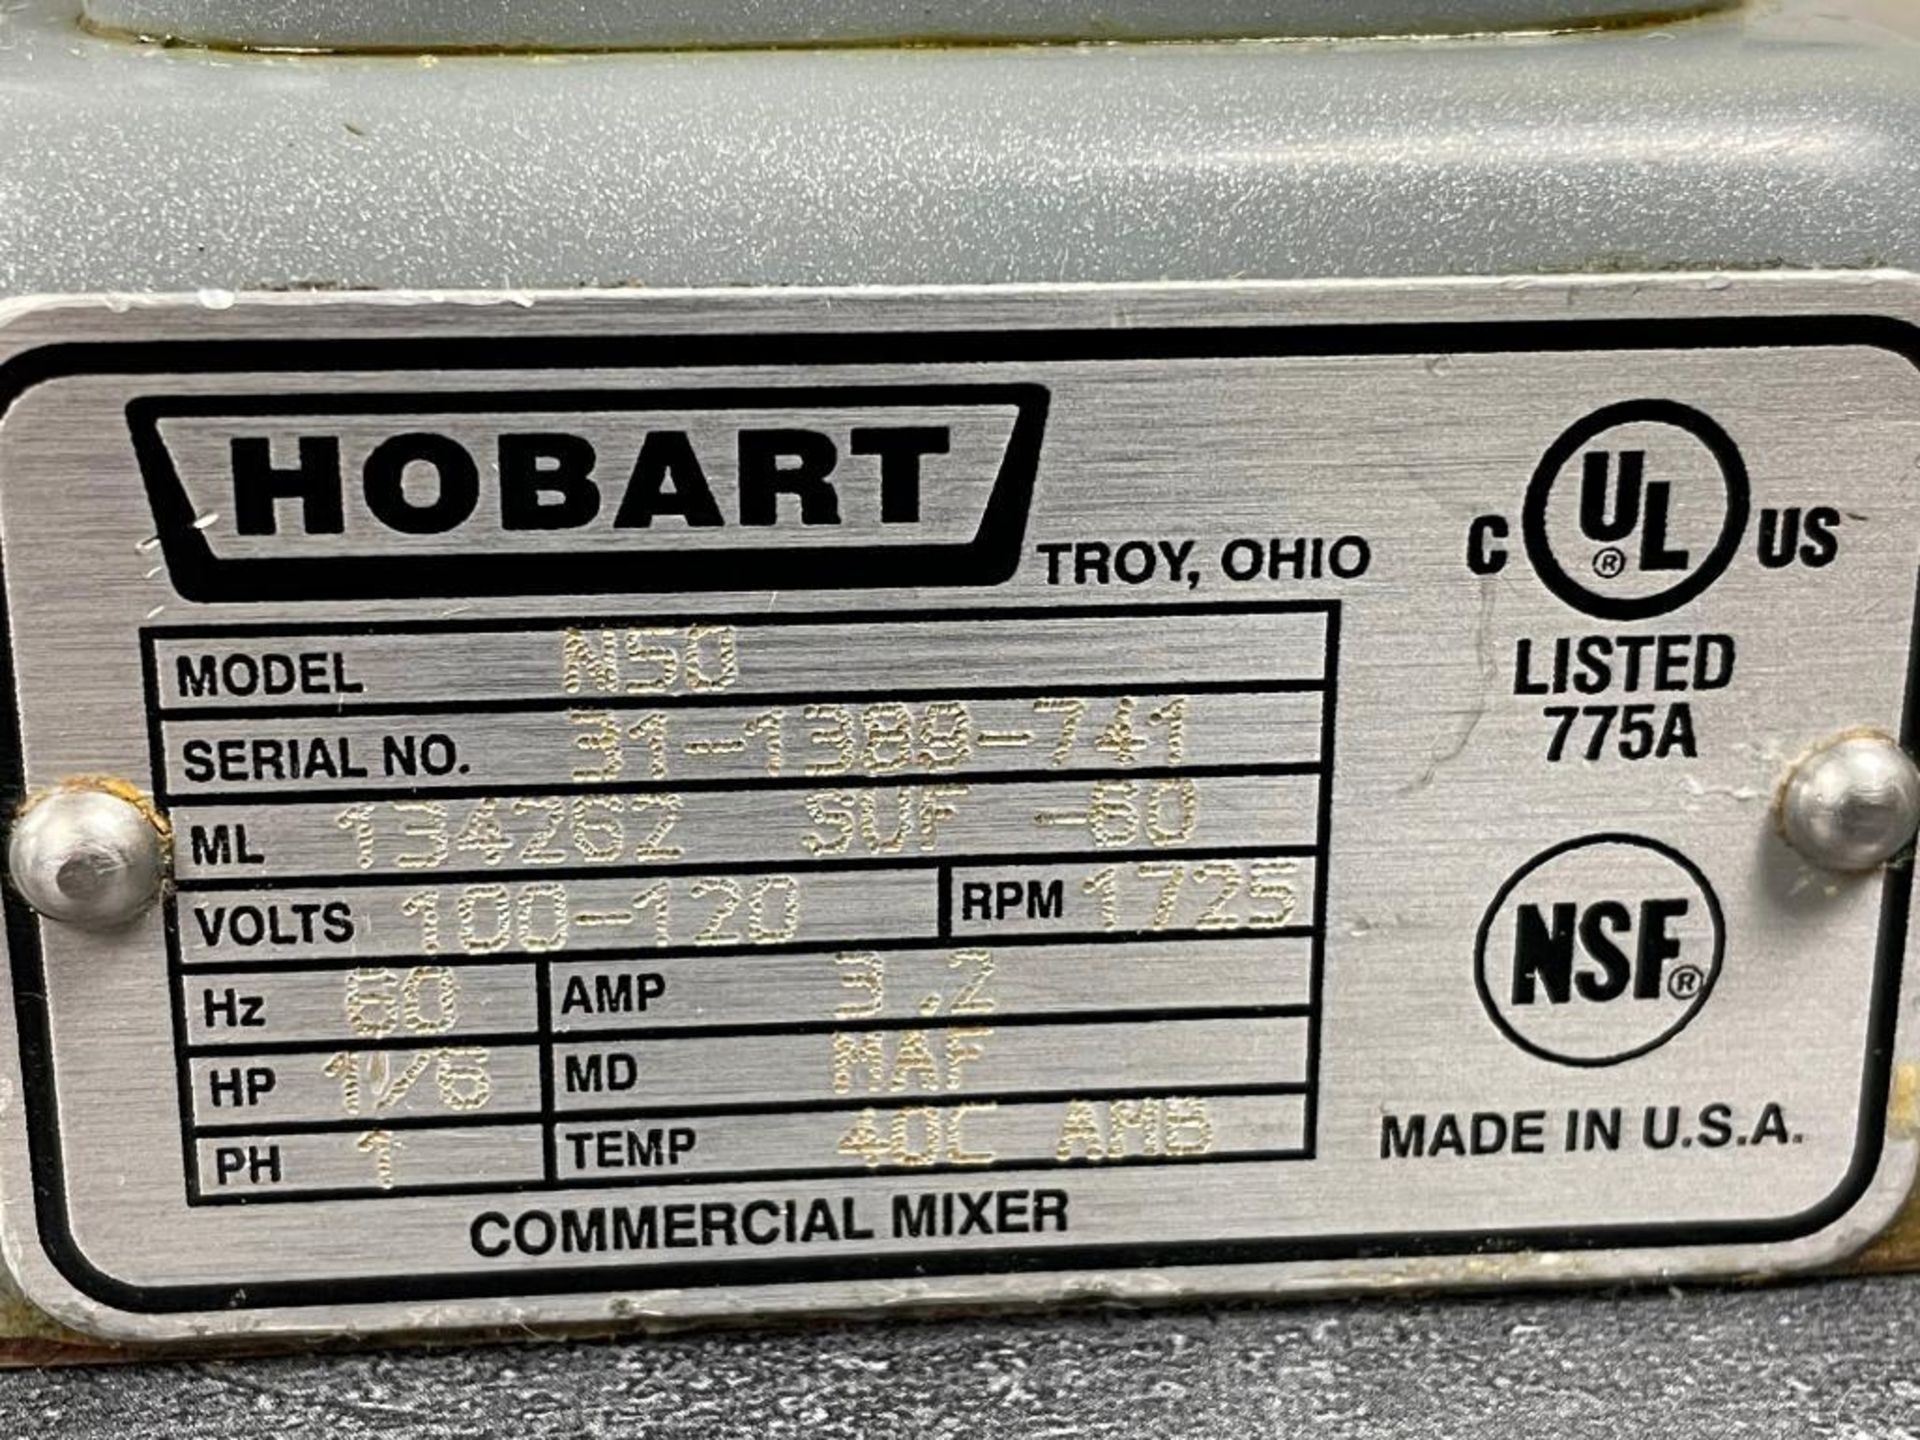 HOBART N50 5QT MIXER WITH HOOK, WHIP, PADDLE - Image 5 of 9